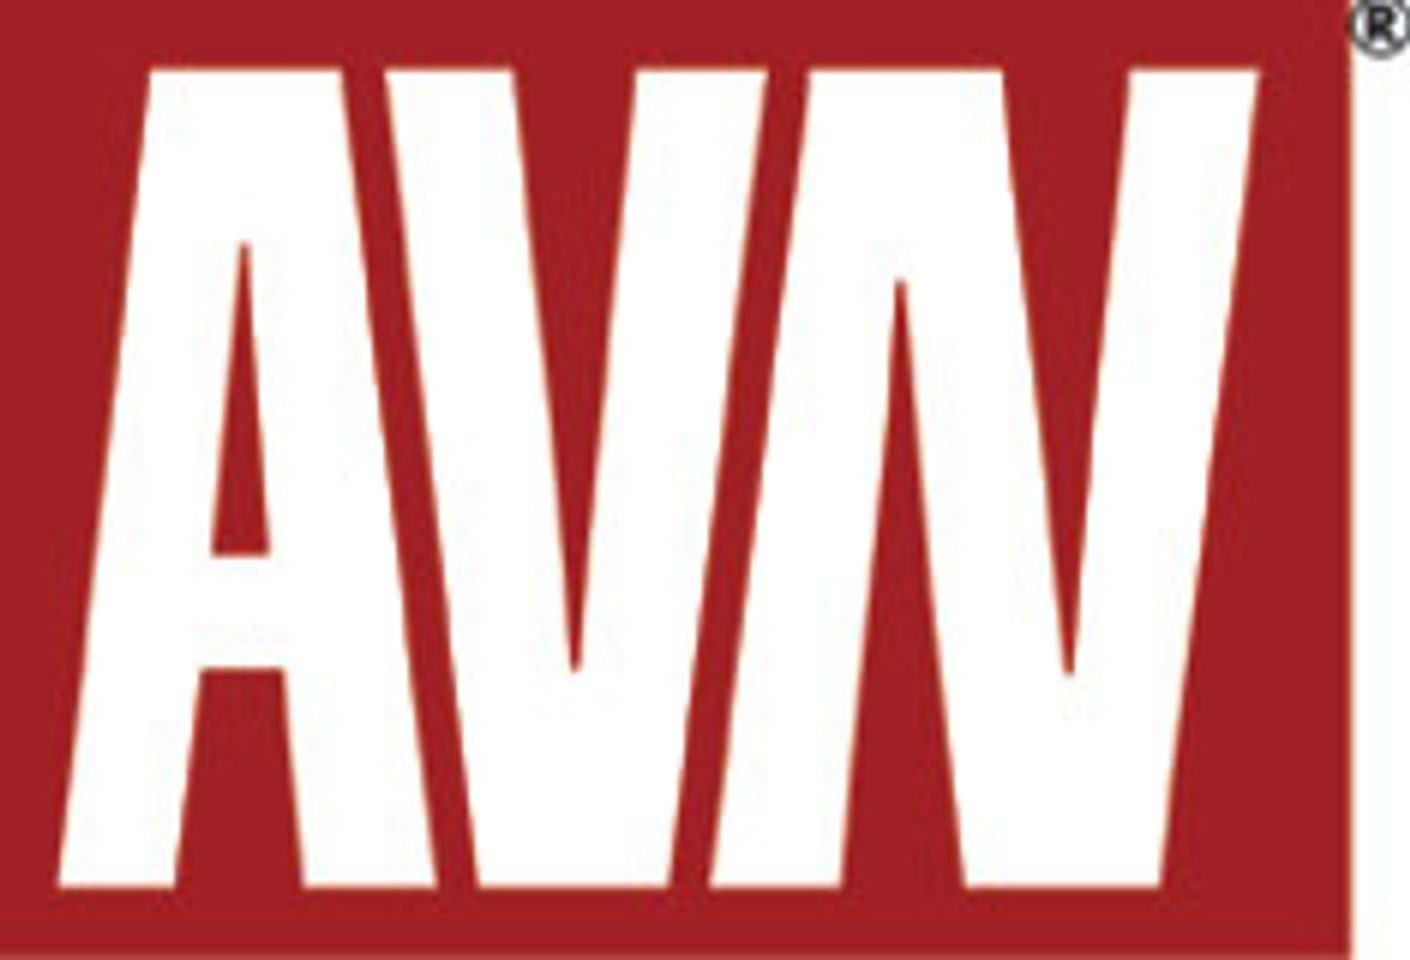 AVN Publications Launches Quarterly Magazine for Adult Novelty Industry